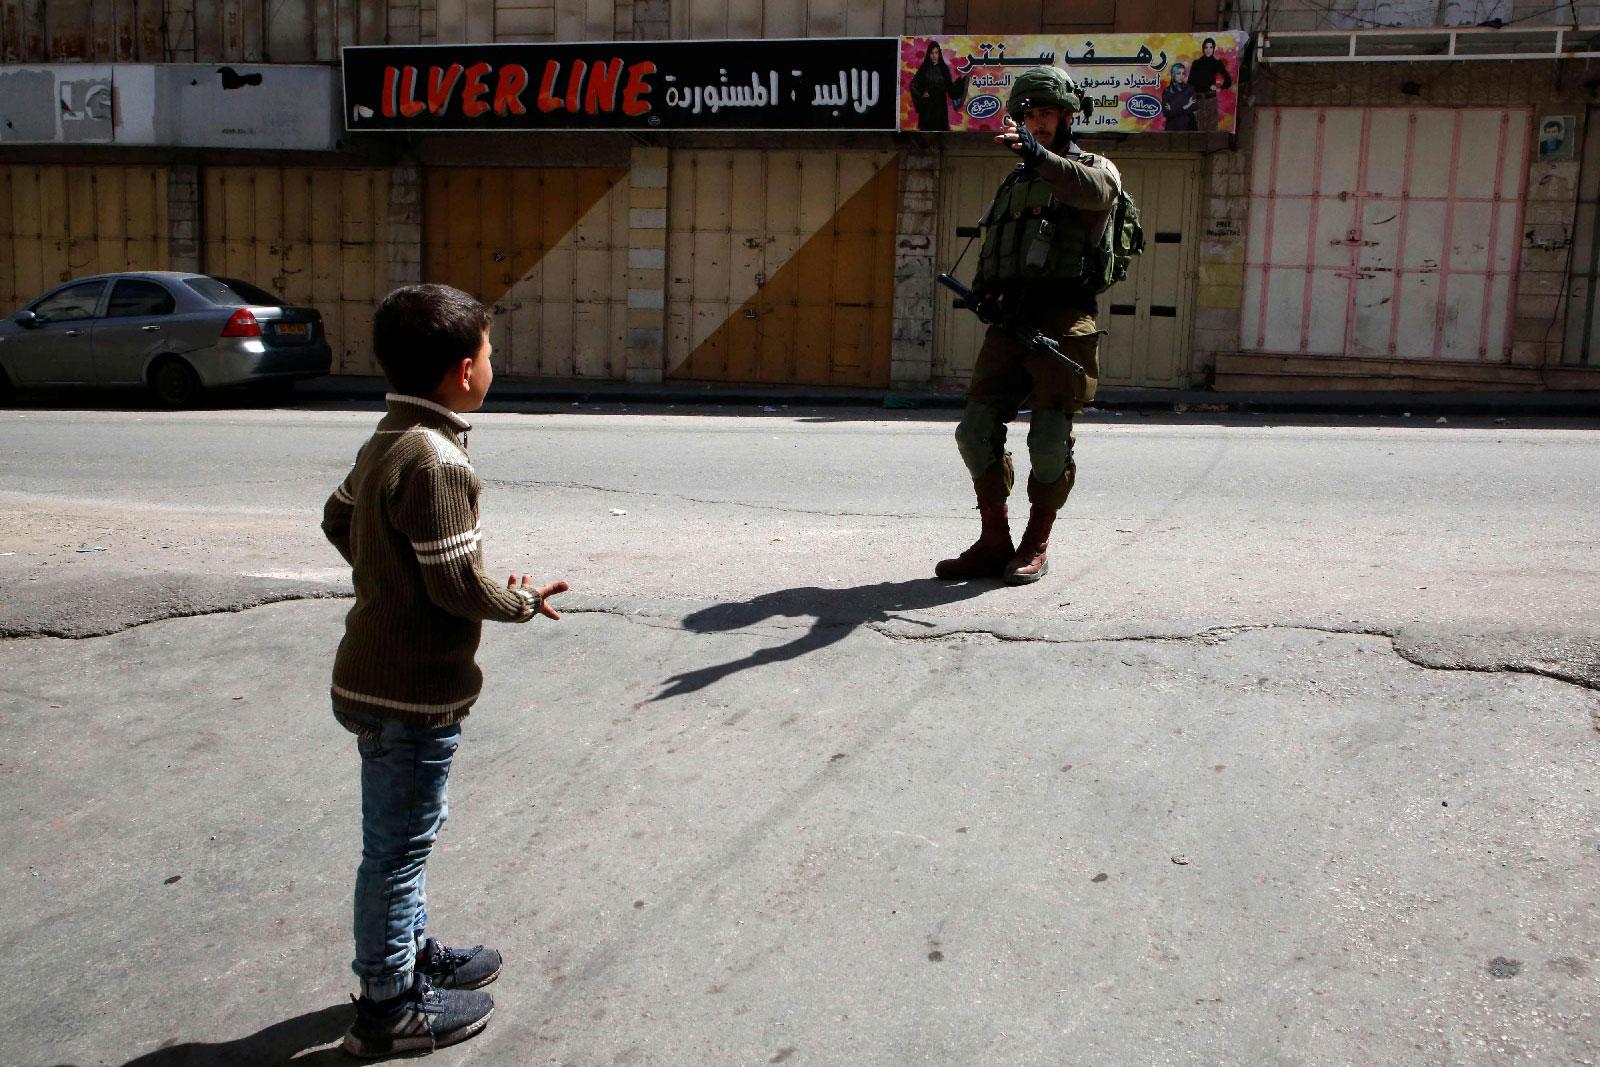 A Palestinian boy is denied access to a street by an Israeli soldier in the occupied West Bank city of Hebron on March 2, 2018, as it's closed for the visit of Jewish settlers to what they believe is the tomb of biblical figure Othniel Ben Kenaz.